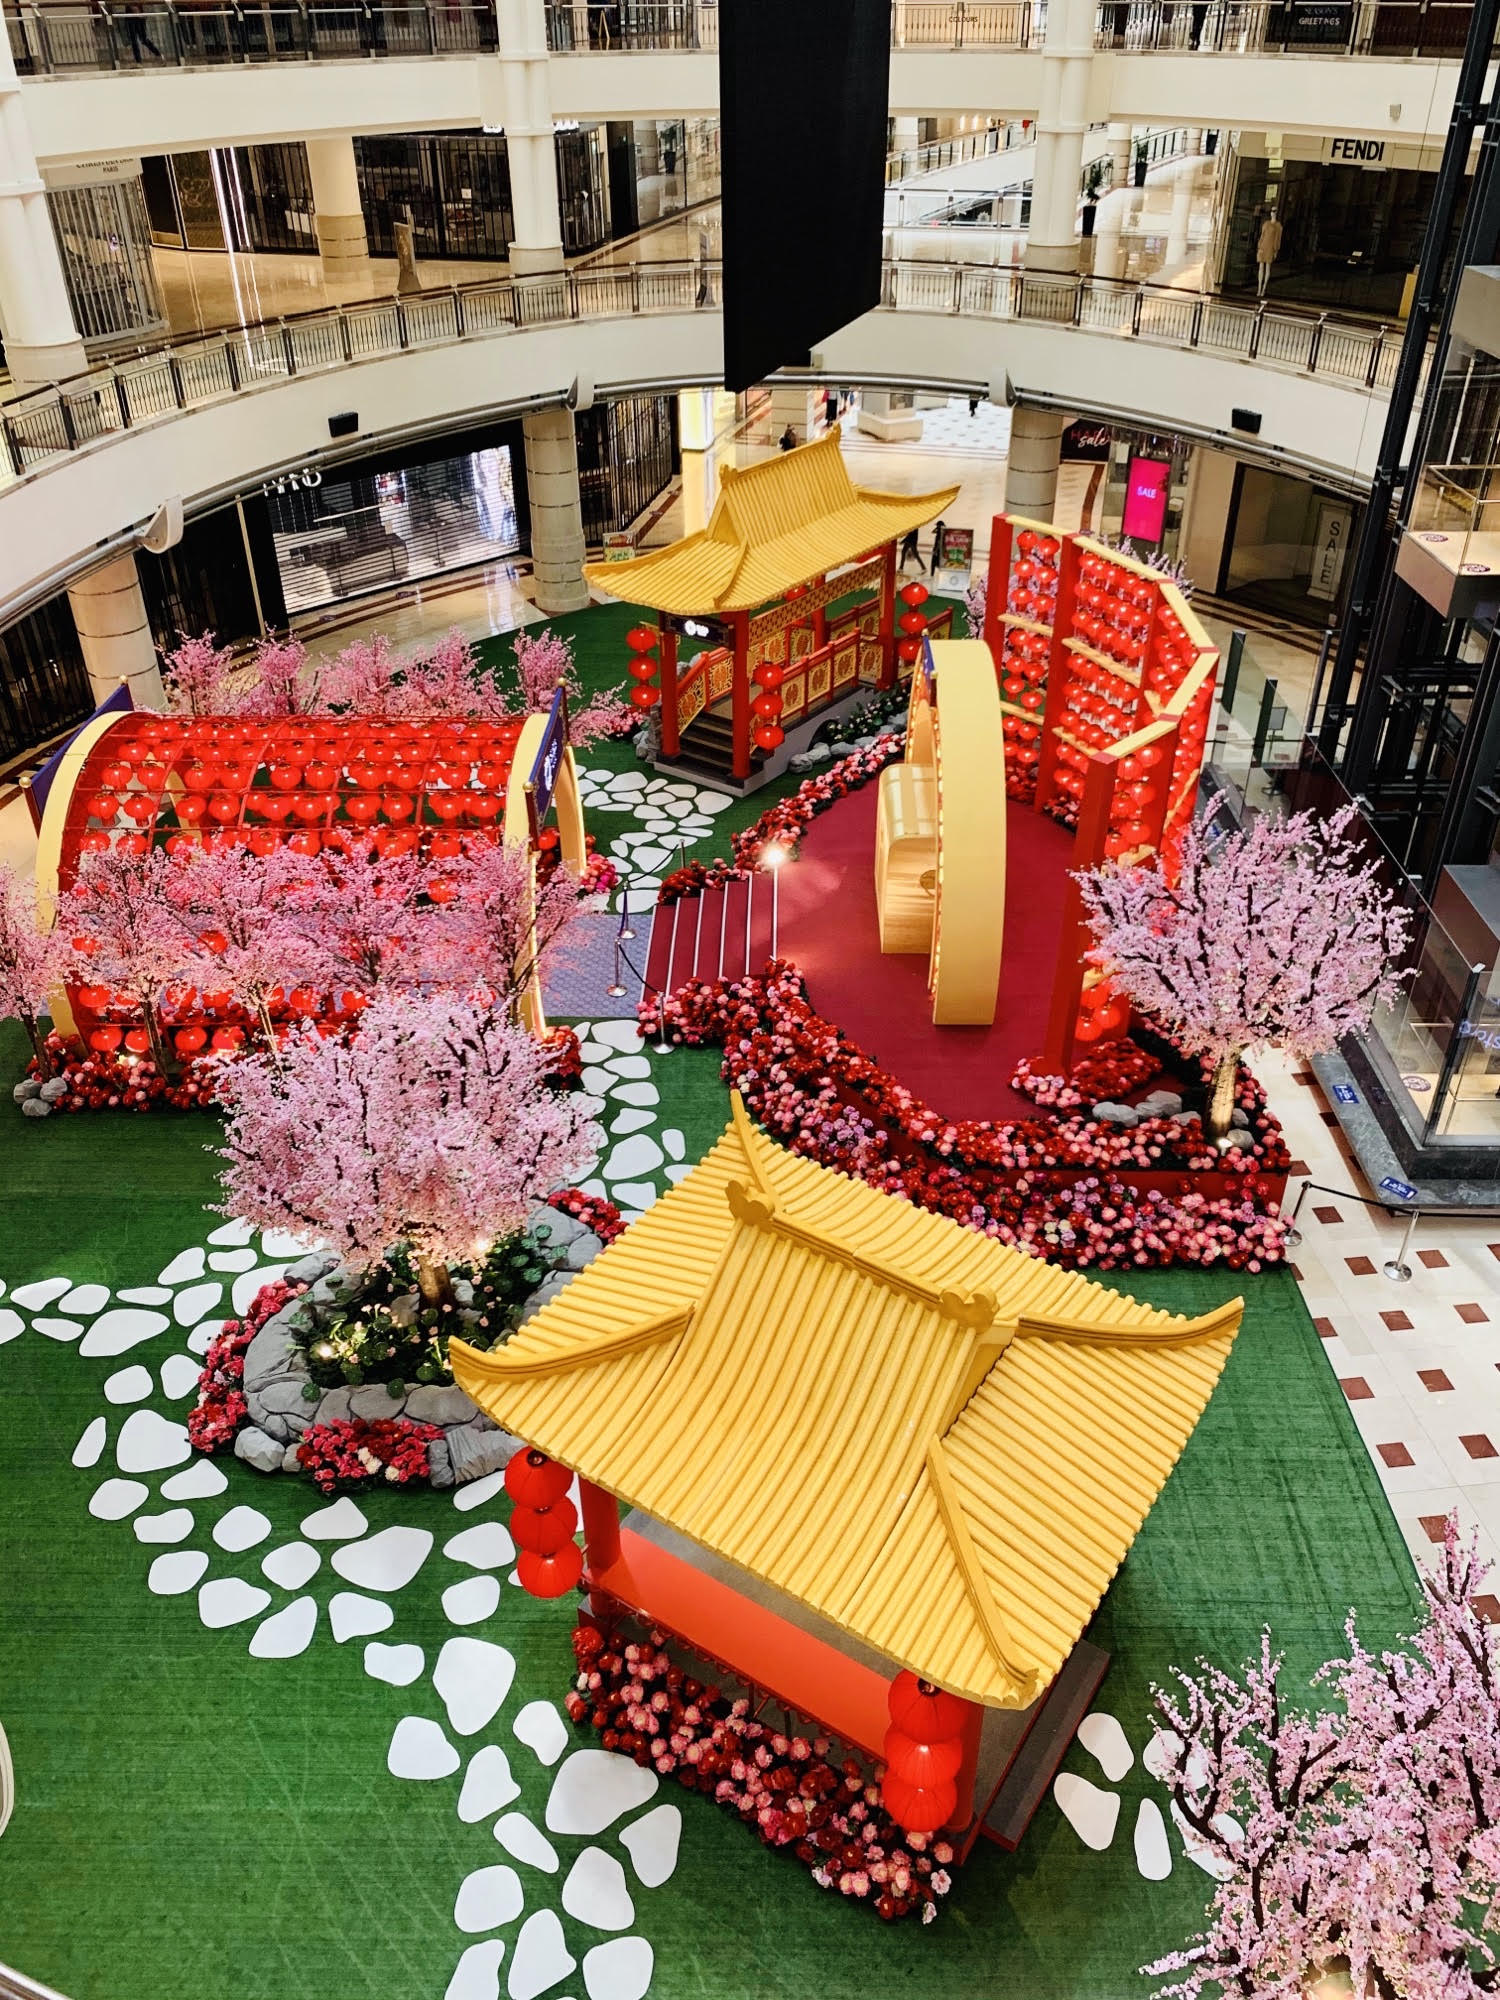 PHOTOS] 18 Malls In Malaysia That Decked Their Halls For Christmas 2019